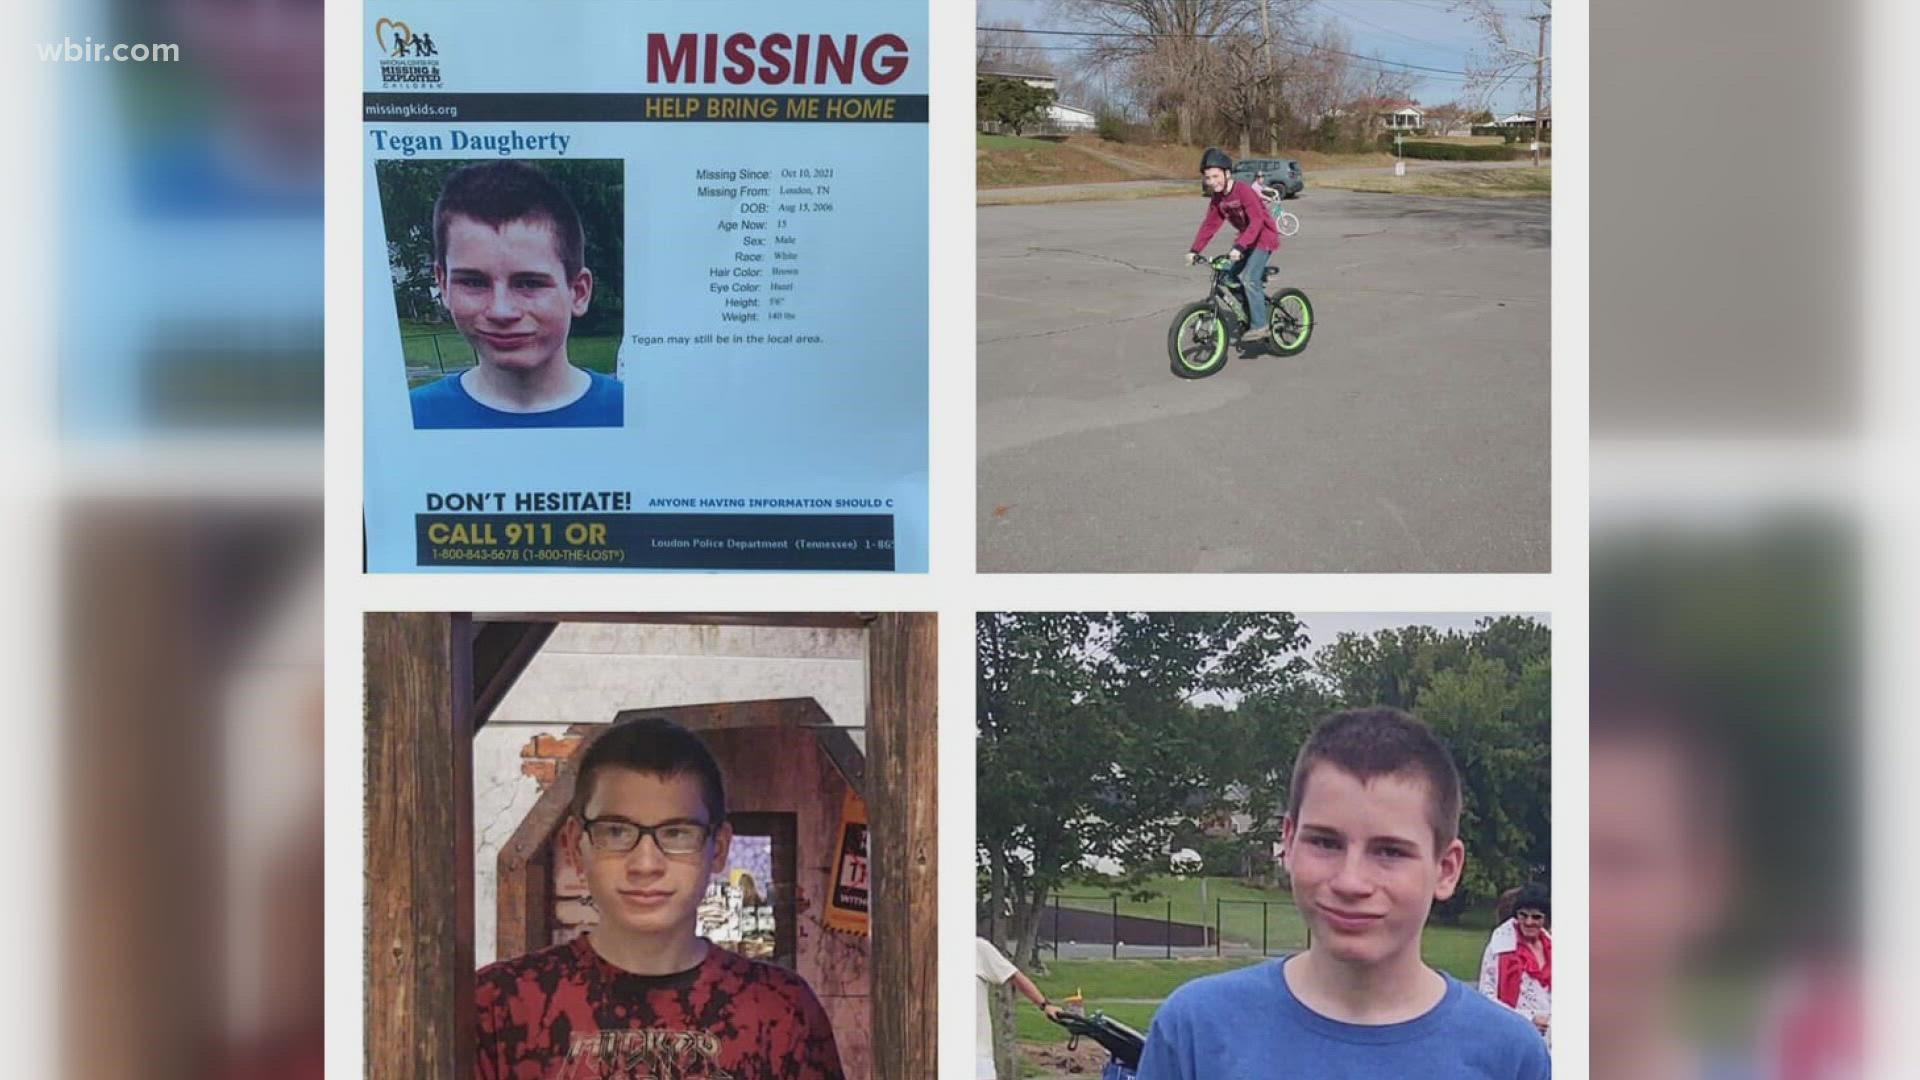 Tegan Daugherty, 15, was last seen Oct. 10 in his home in Loudon. Police said that he is believed to have left the area on a black bicycle with neon green stripes.